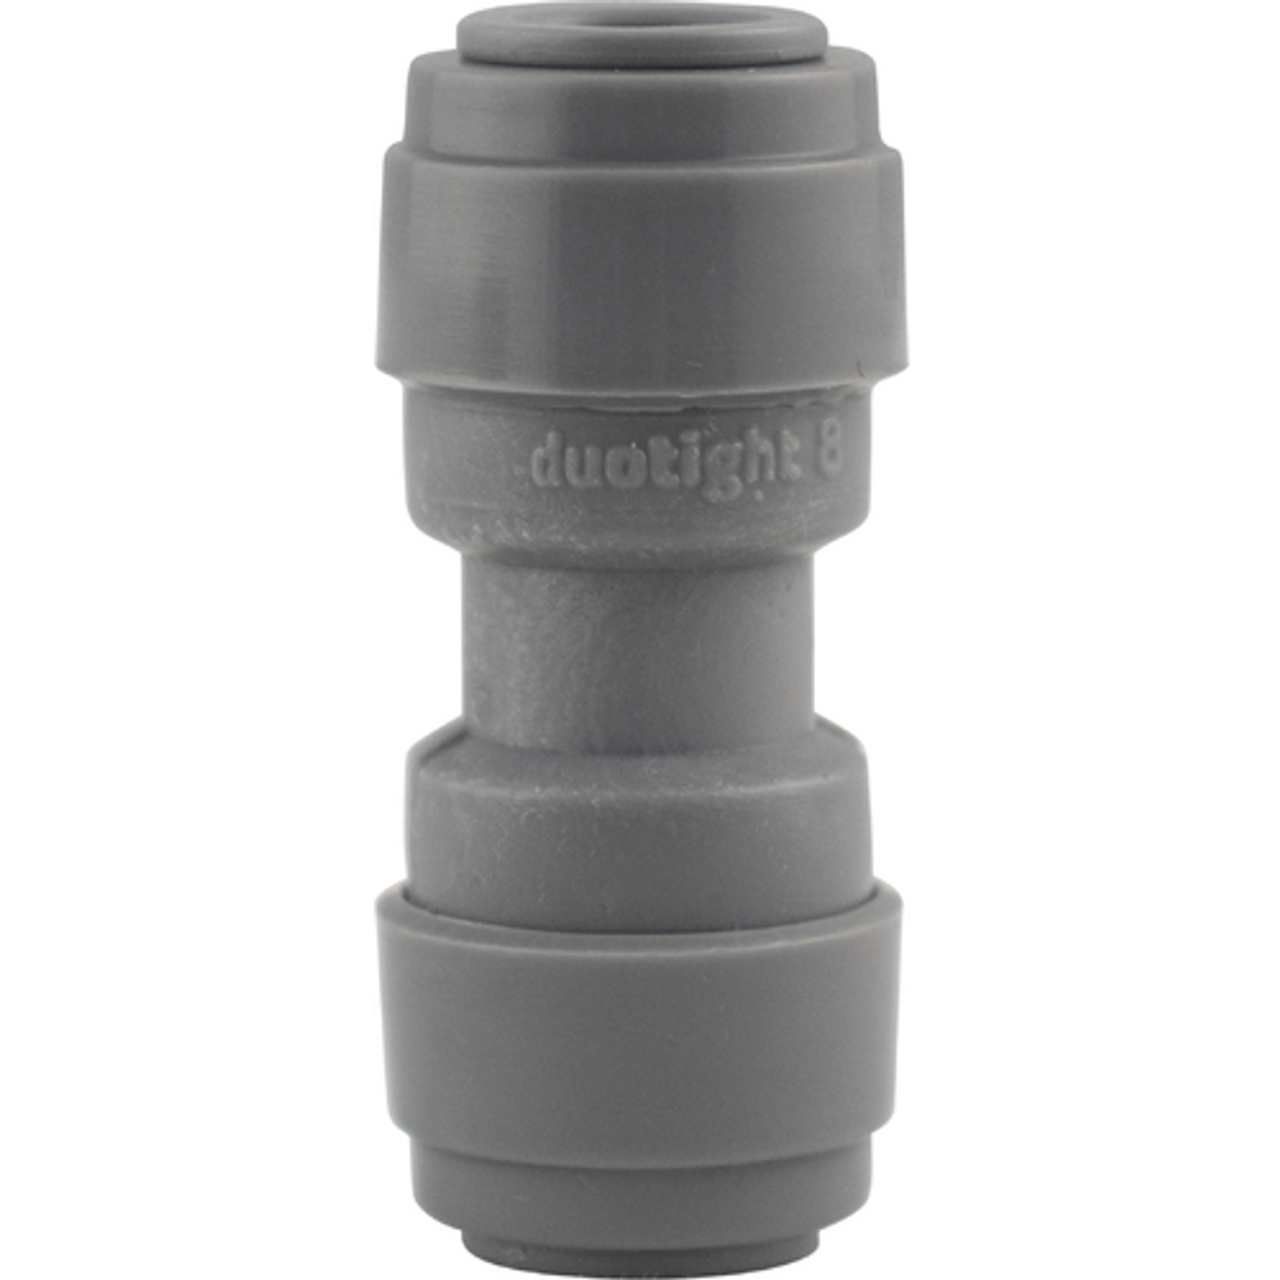 Duotight Push-In Fitting - 8 mm (5/16 in.) Joiner